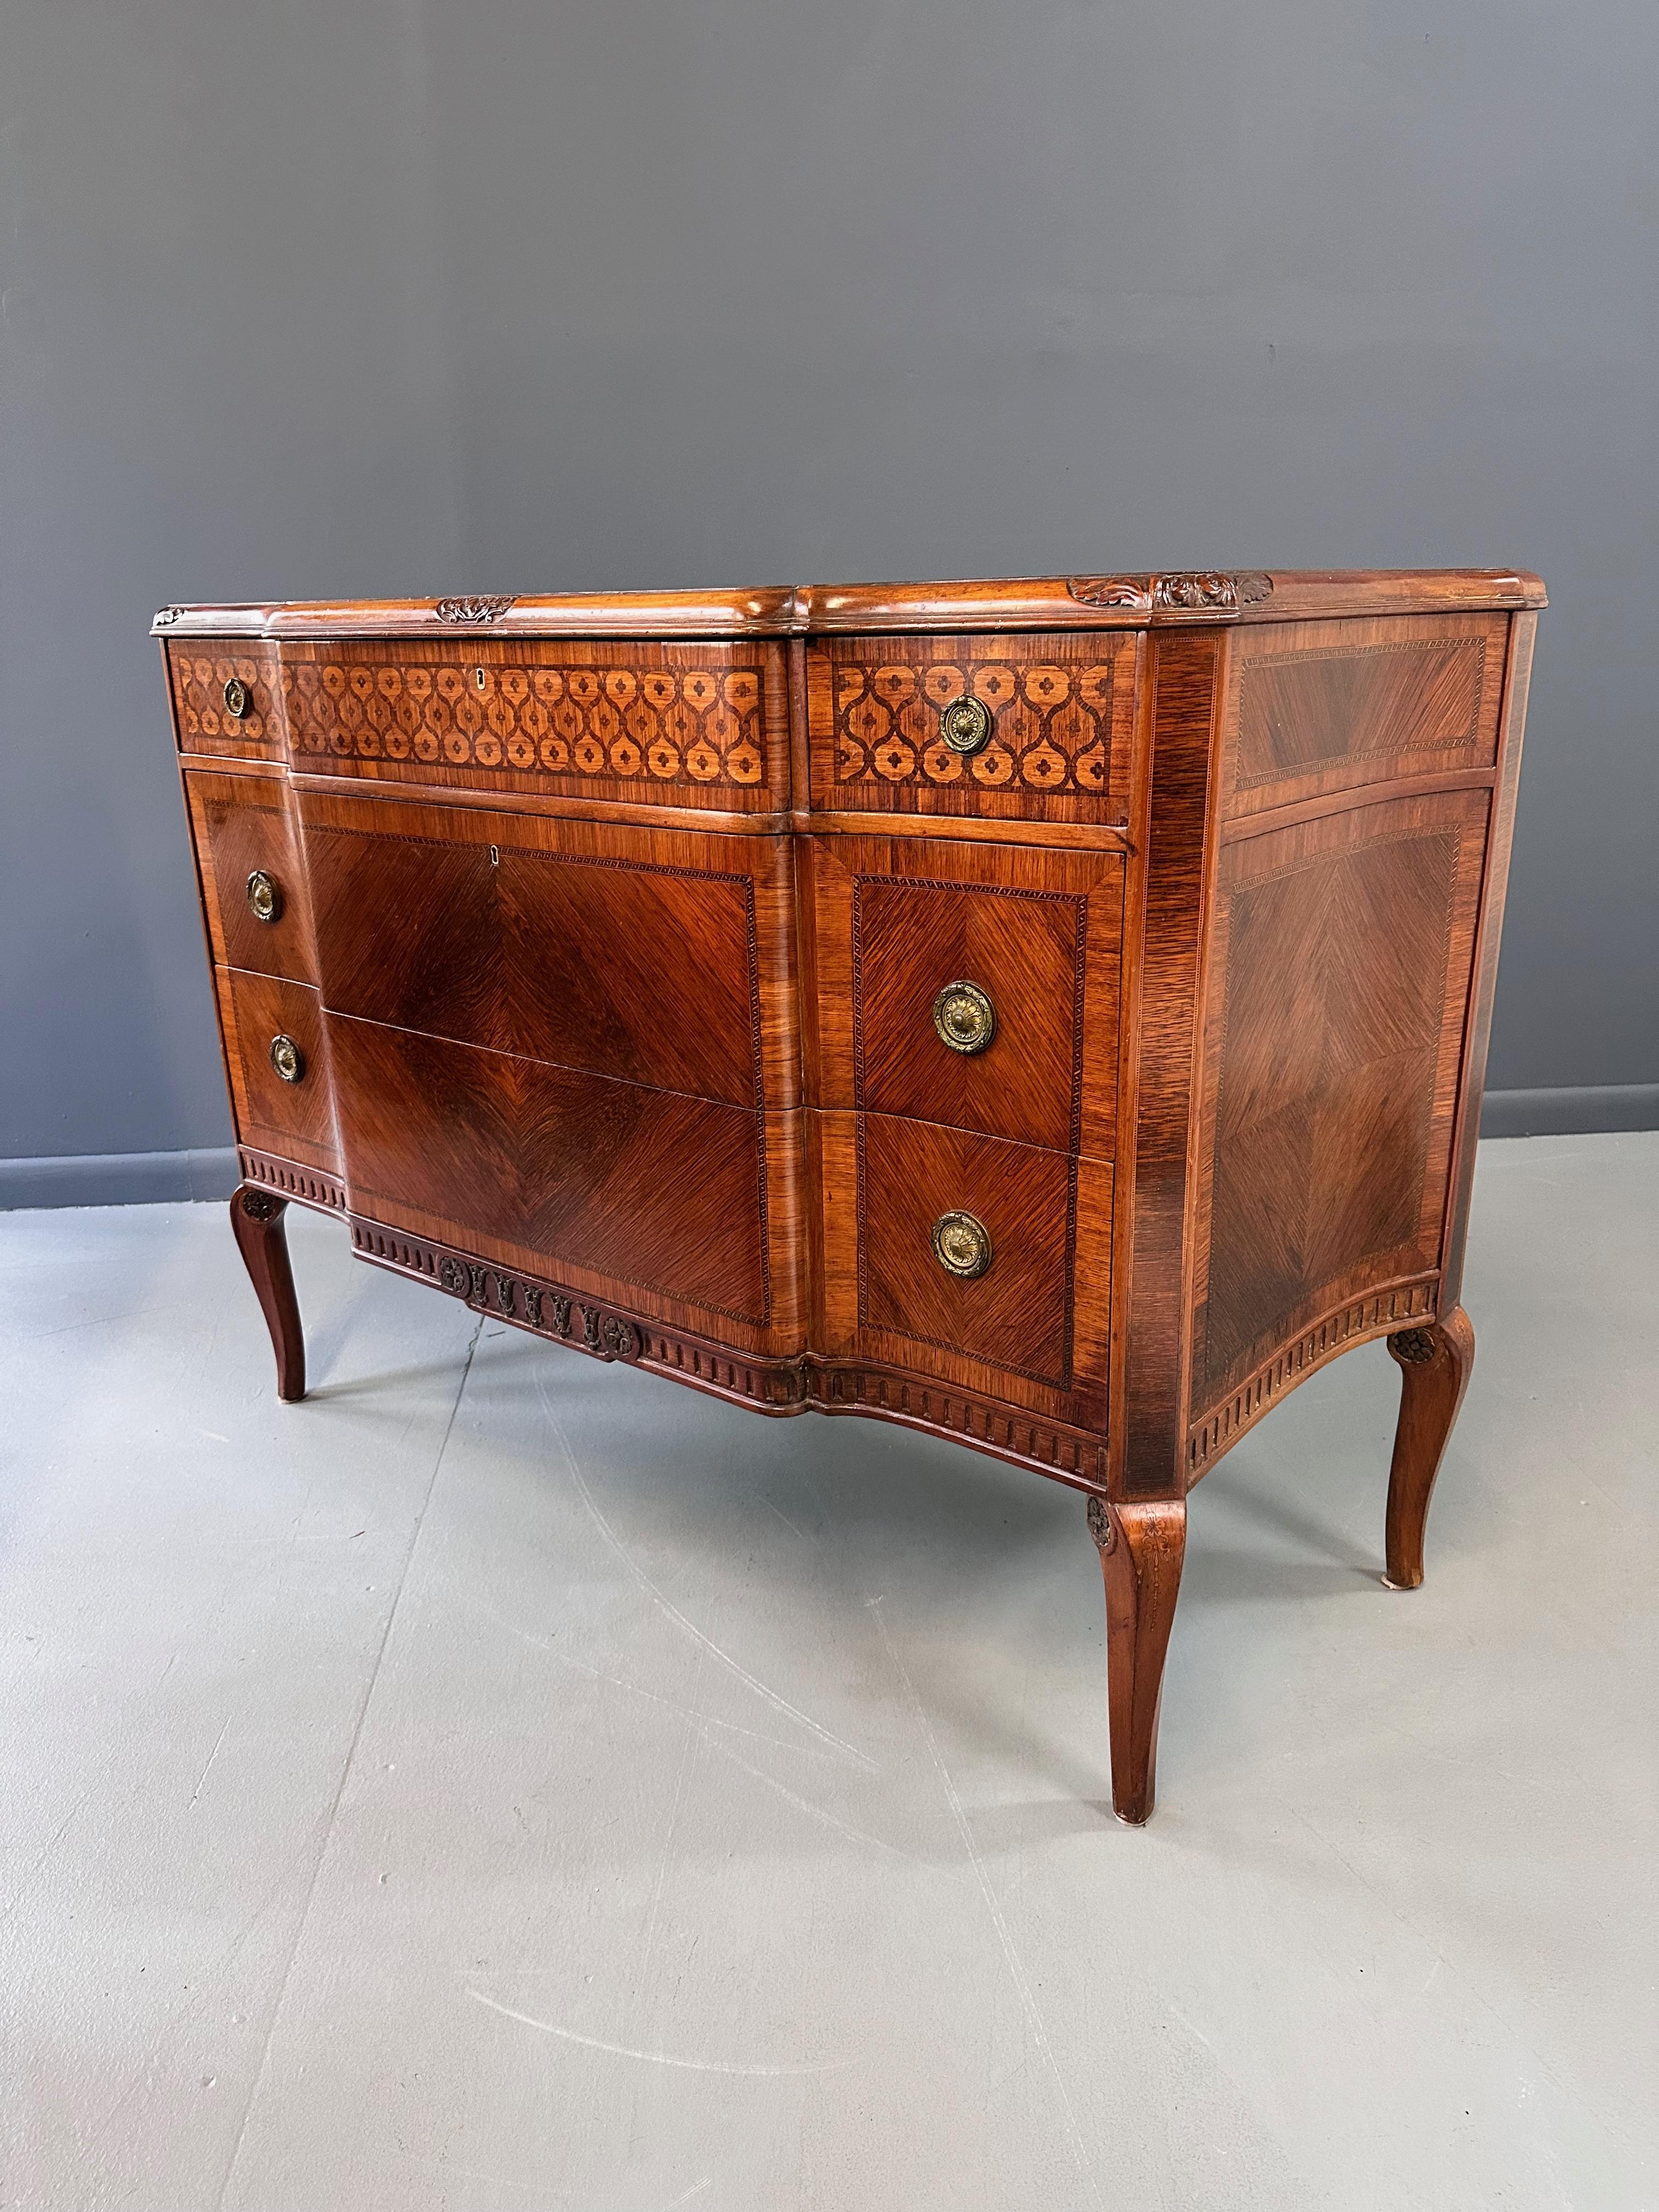 Expertly crafted in the style of Henry-François Riesener and imported from Italy by Slack, Rassnick & Co. NY in the early 1900s, this commode boasts intricate marquetry and a classic Louis XVI style. With expertly carved details and elegant lines,